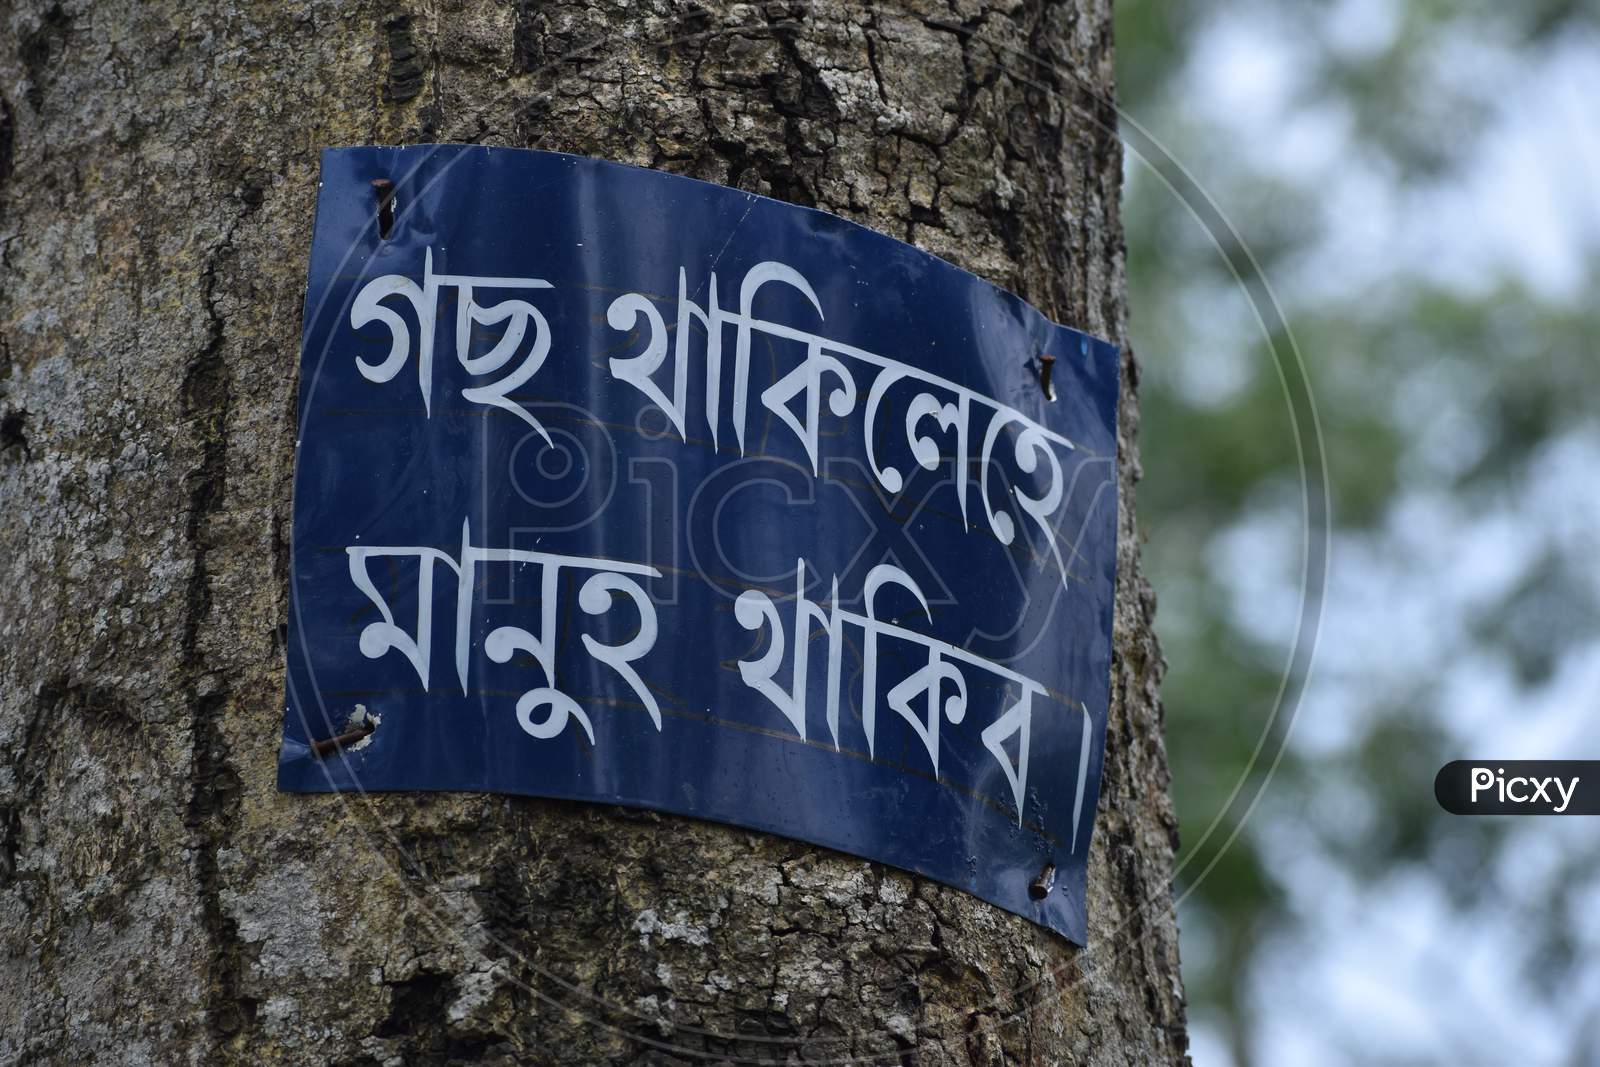 a sign in Assamese language in a tree garden